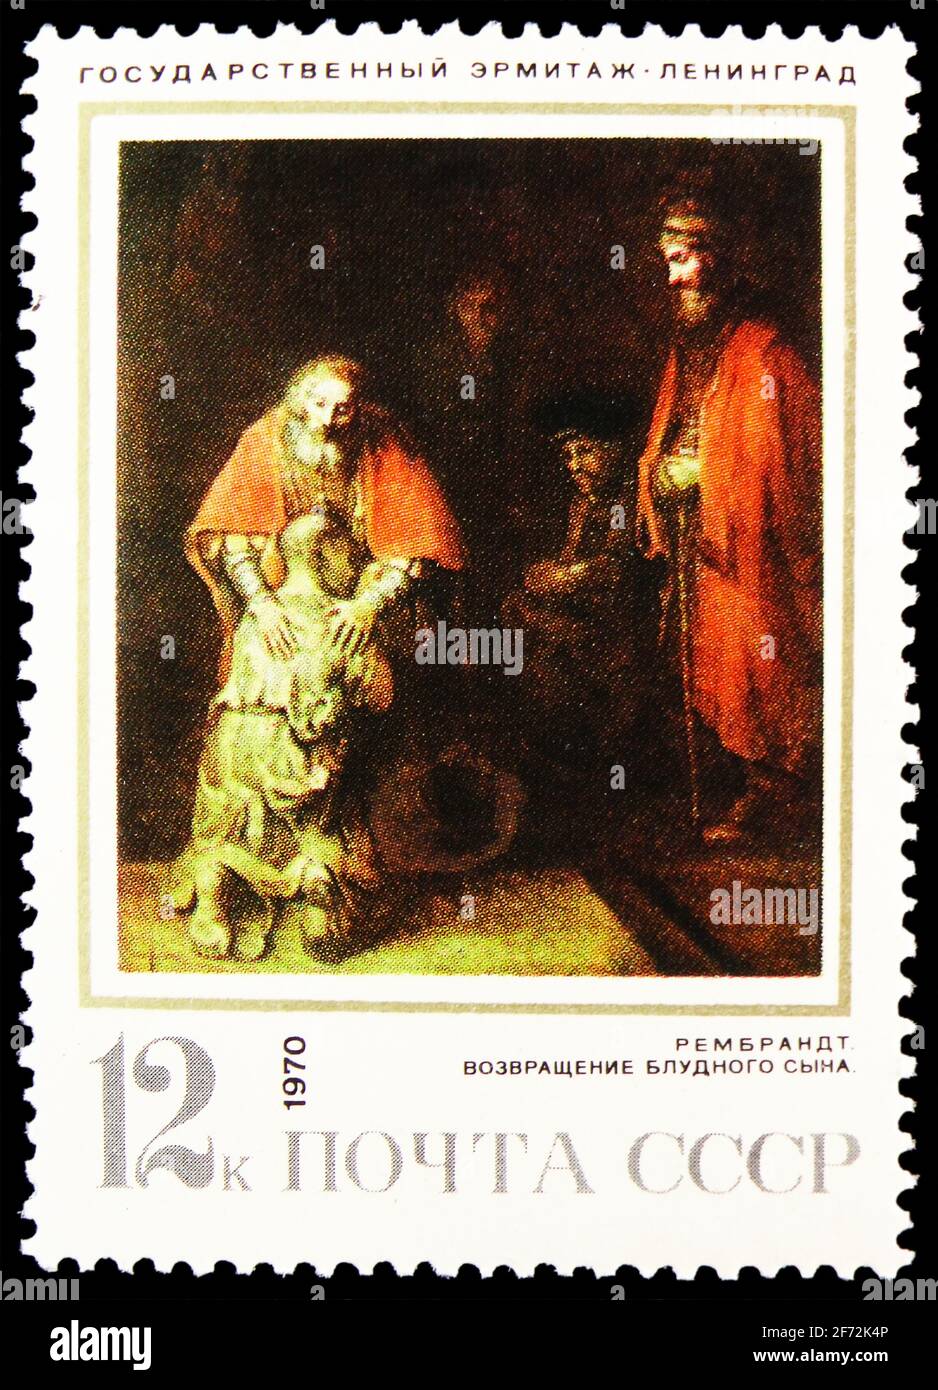 MOSCOW, RUSSIA - DECEMBER 22, 2020: Postage stamp printed in Soviet Union shows Return of the Prodigal Son, Rembrandt (1669), Foreign Paintings in Sov Stock Photo